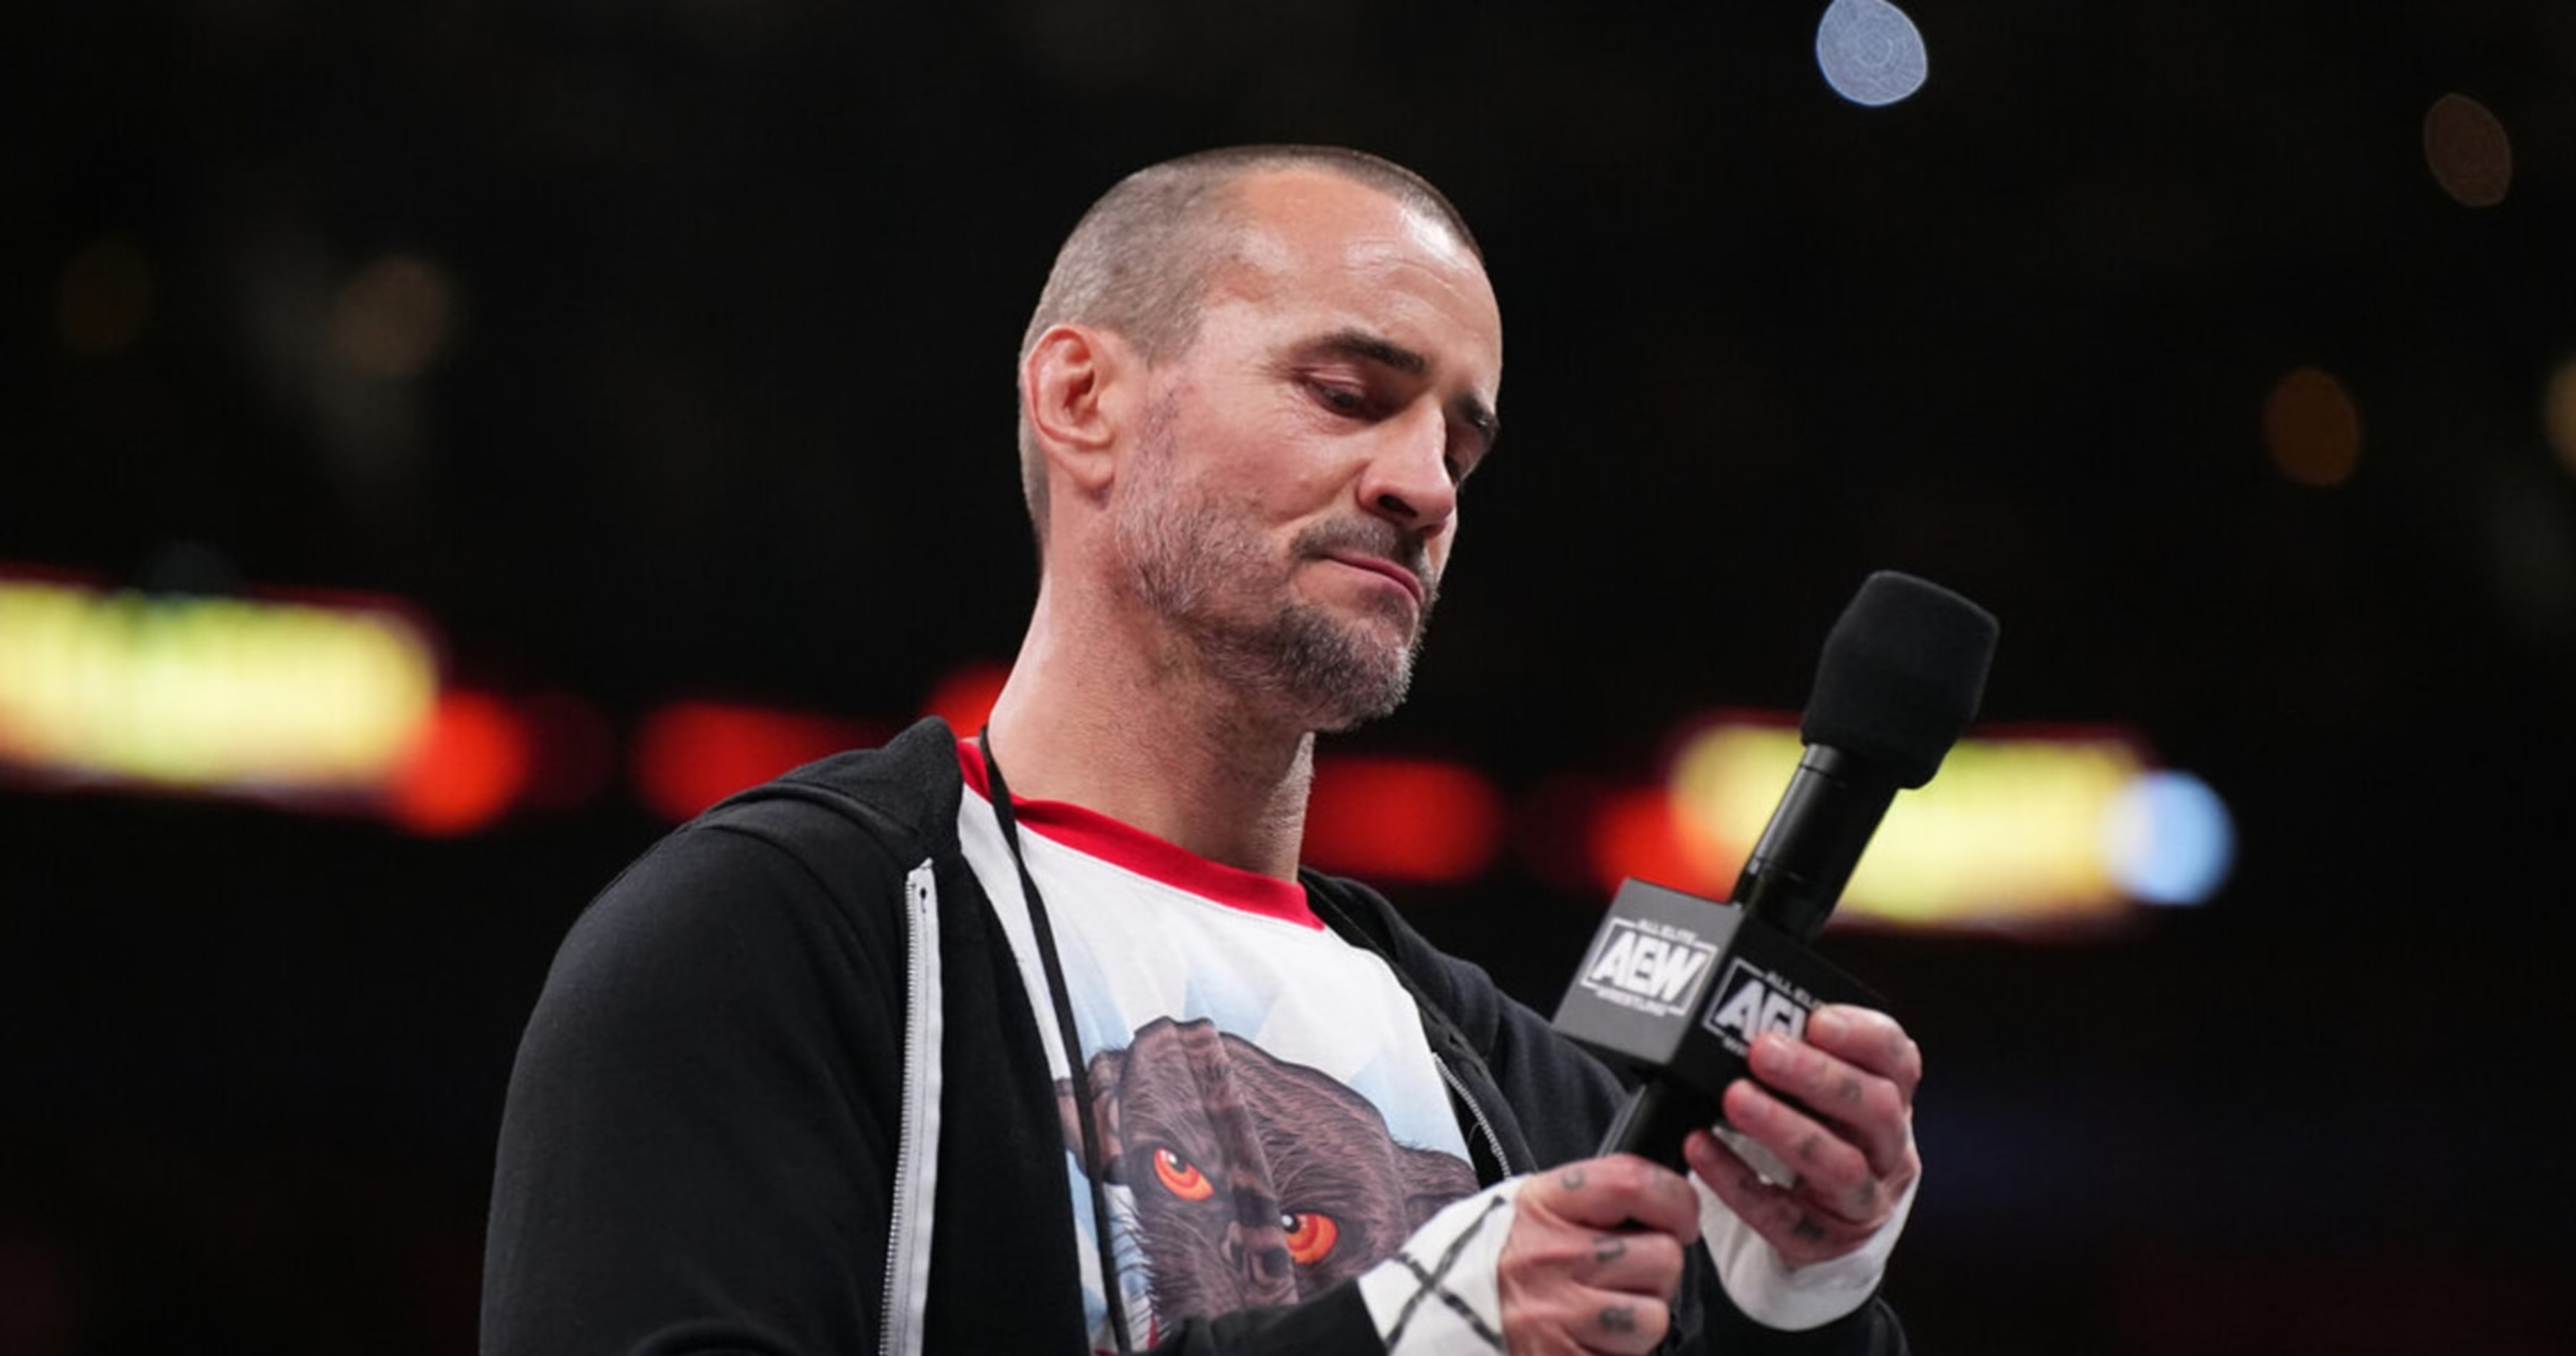 Backstage Wwe And Aew Rumors Latest On Cm Punk Tommaso Ciampa And More News Scores 